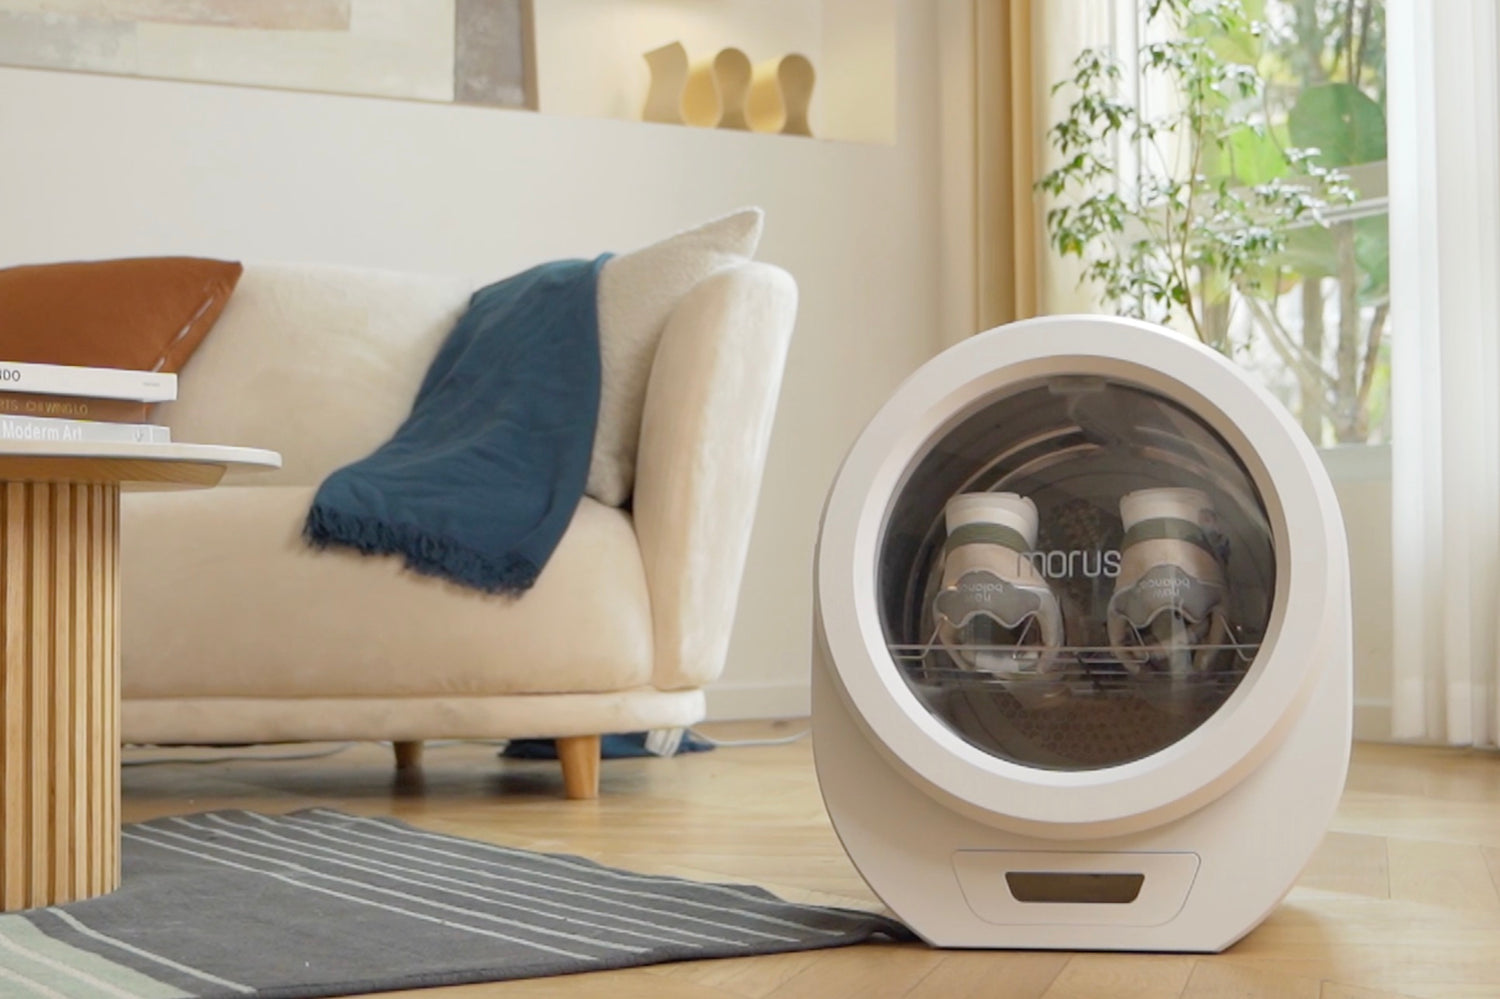 Morus Zero Review: fast drying, space-saving portable dryer!